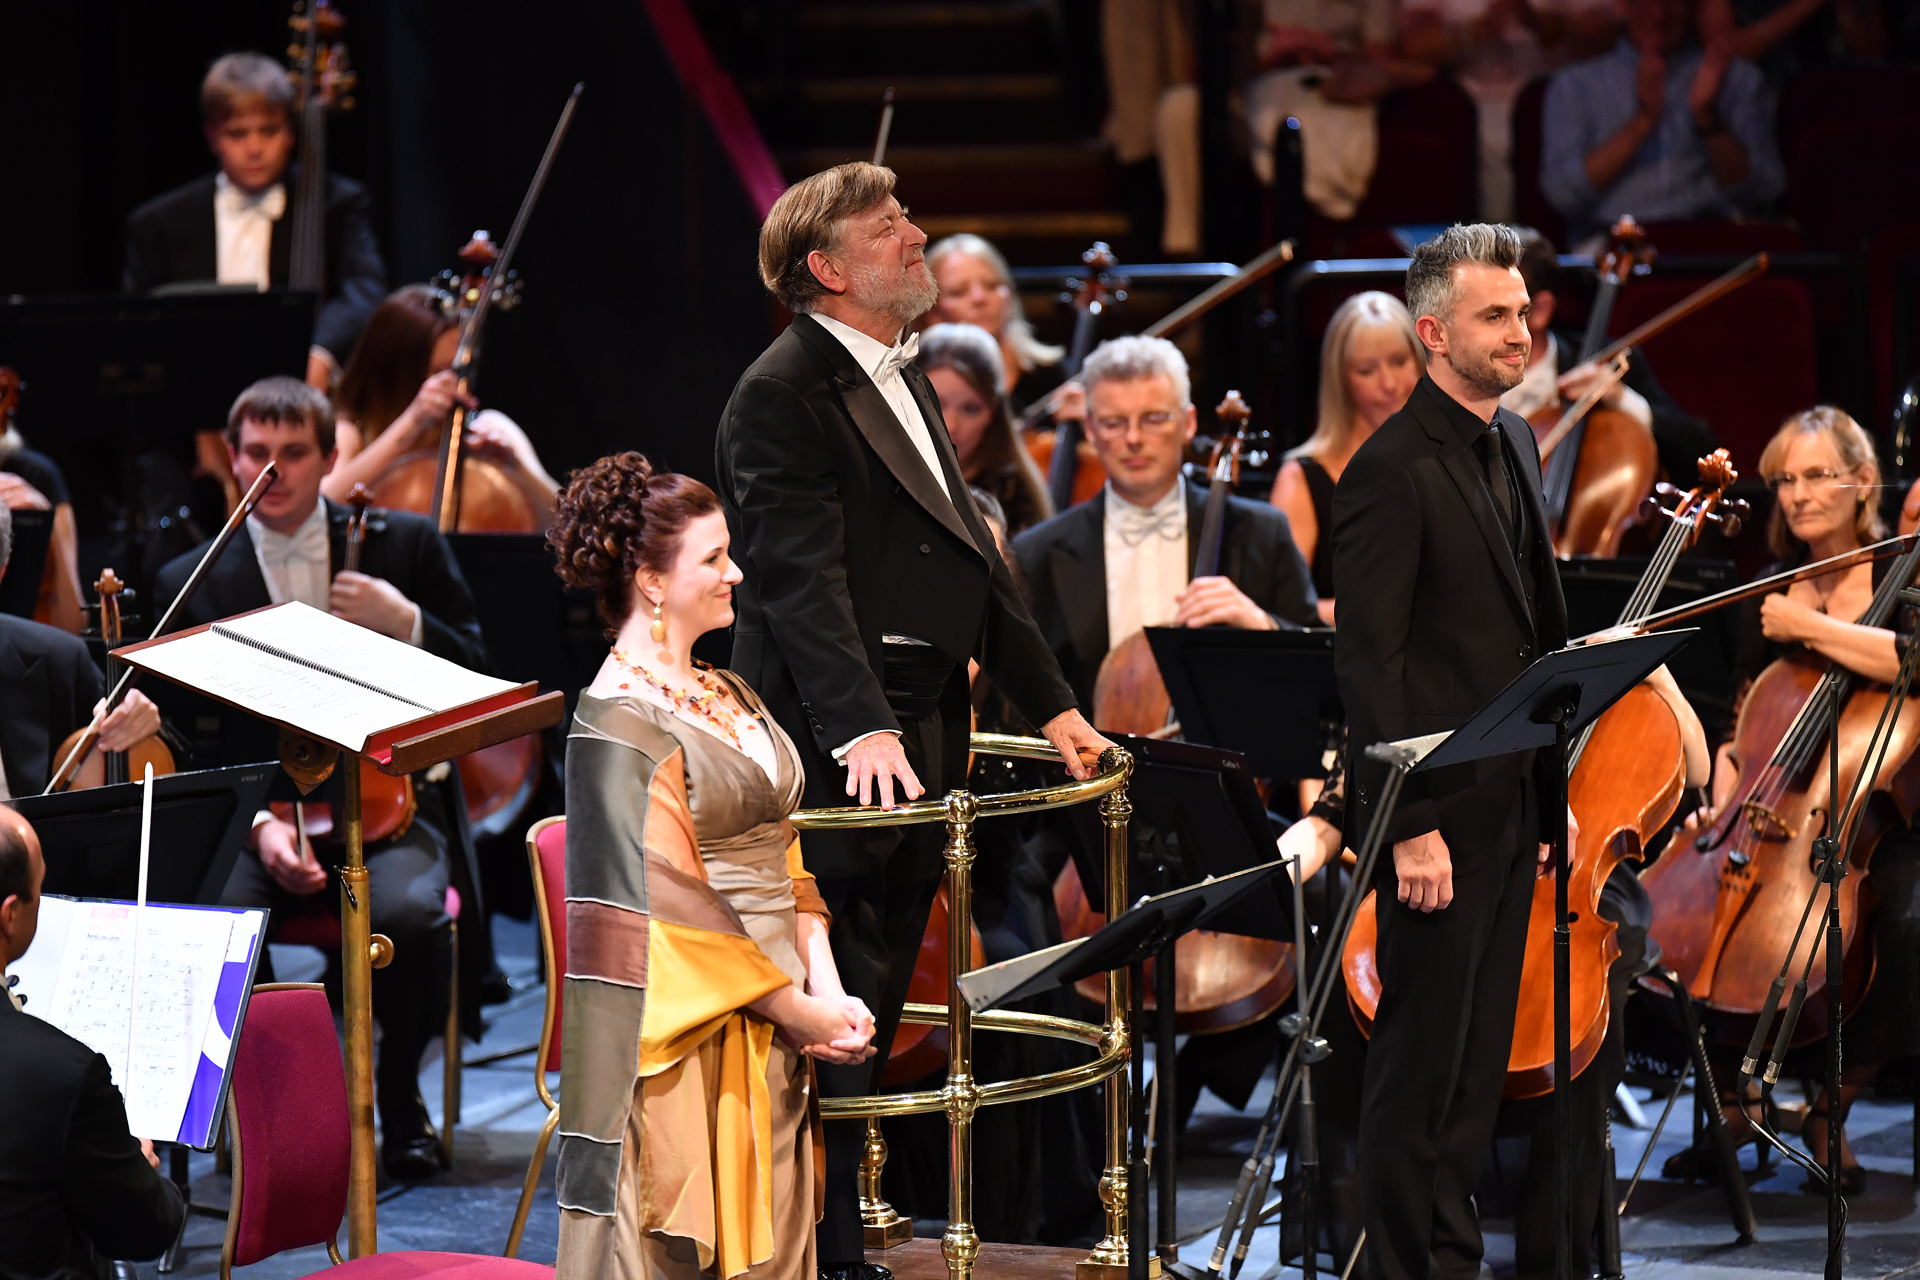 Wood's Scenes from Comus at the Proms